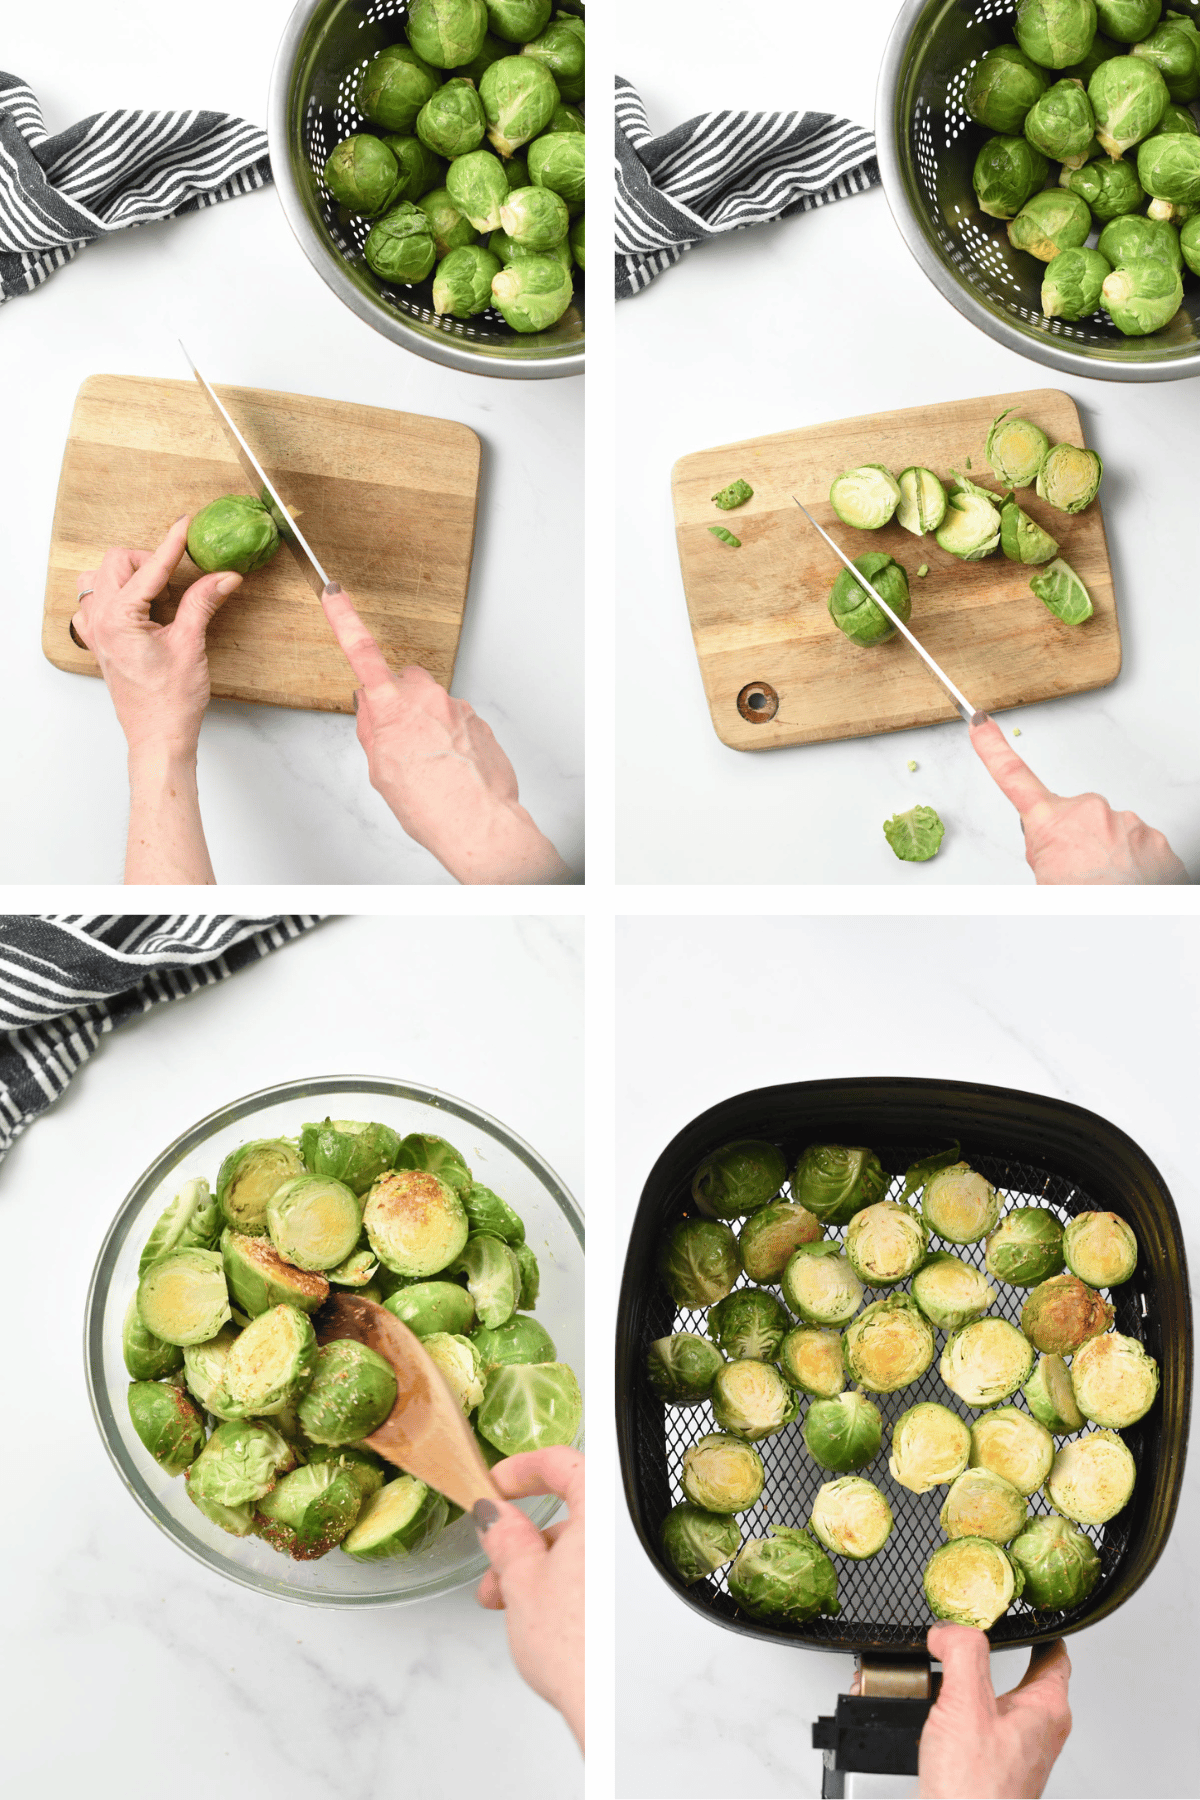 Making Air Fryer Brussel Sprouts